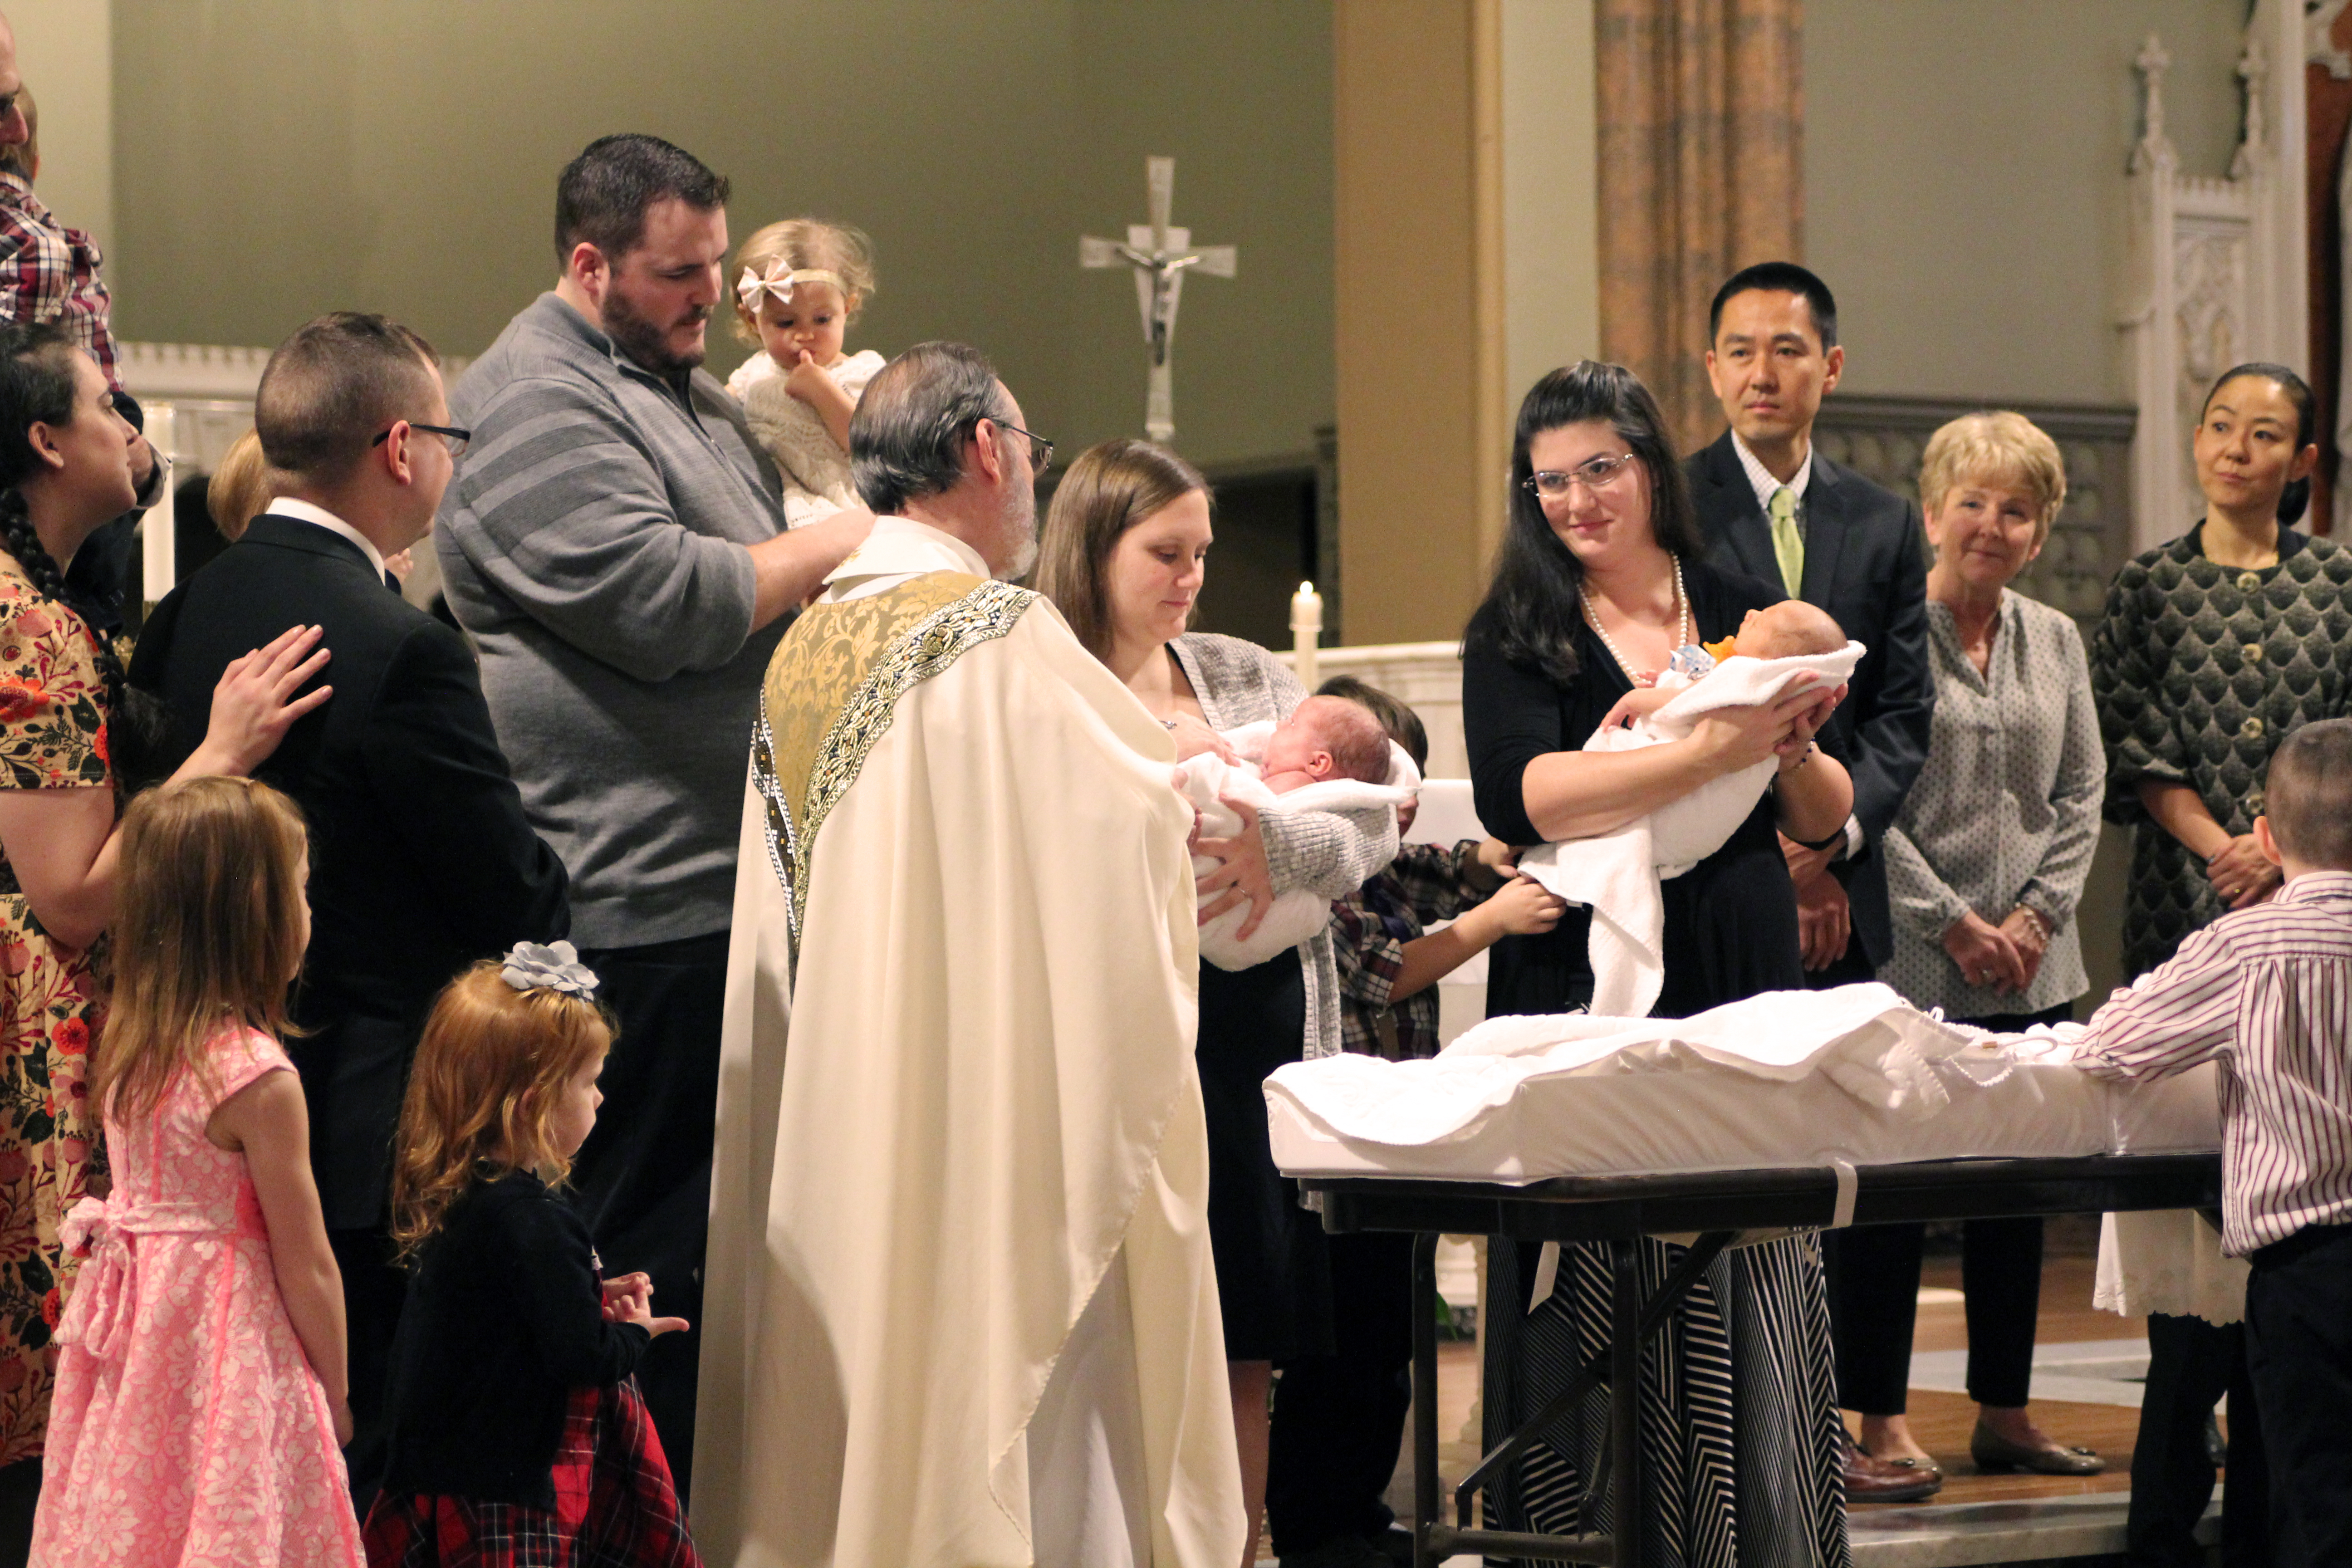 presentation of a child in the catholic church